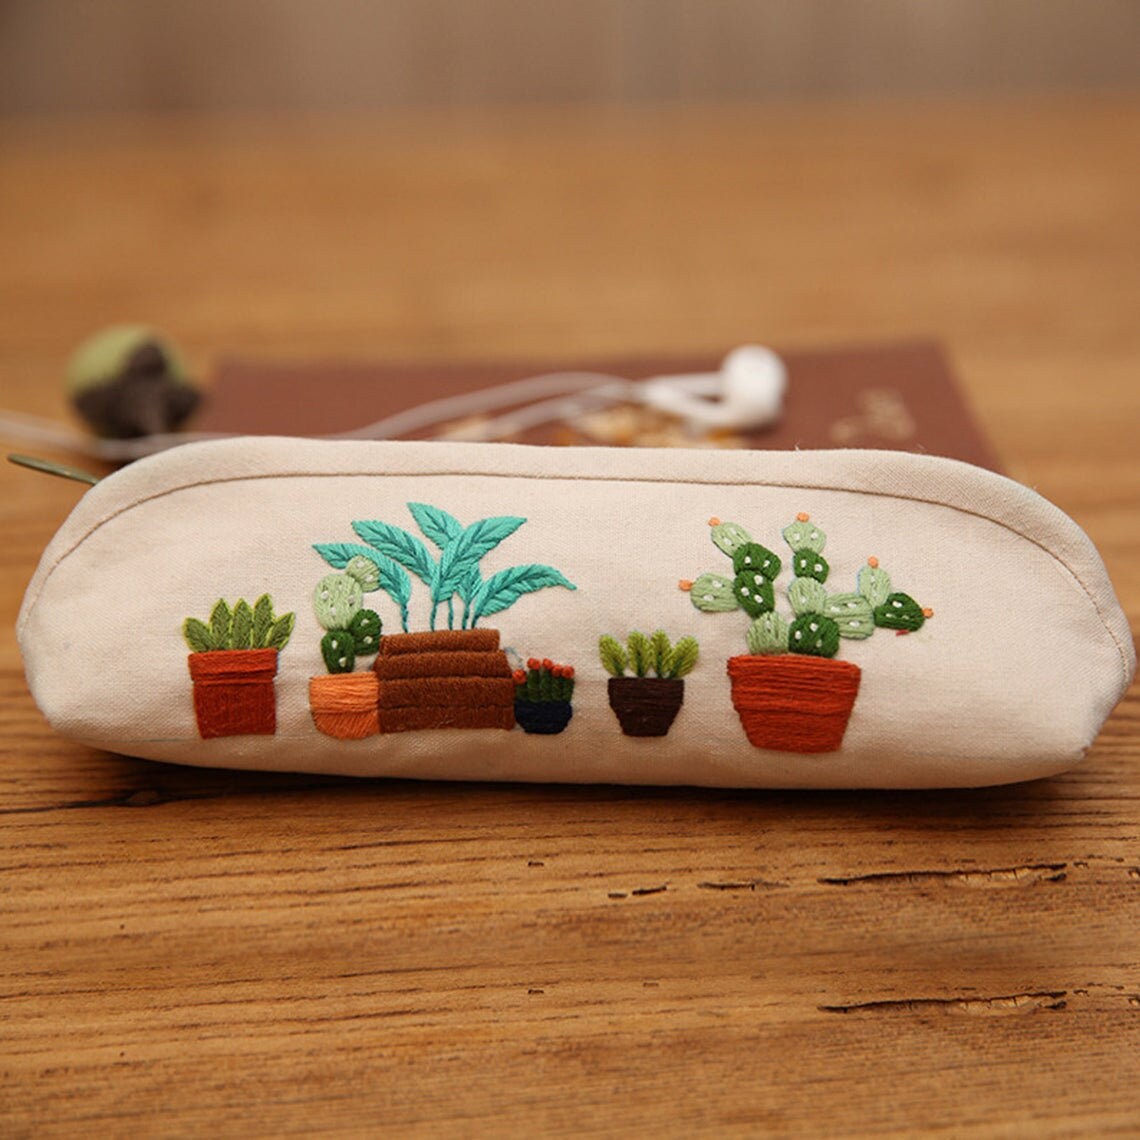 Green Oh Hey Embroidery Strap Pouch Slim Pencil Cases Light Stationery